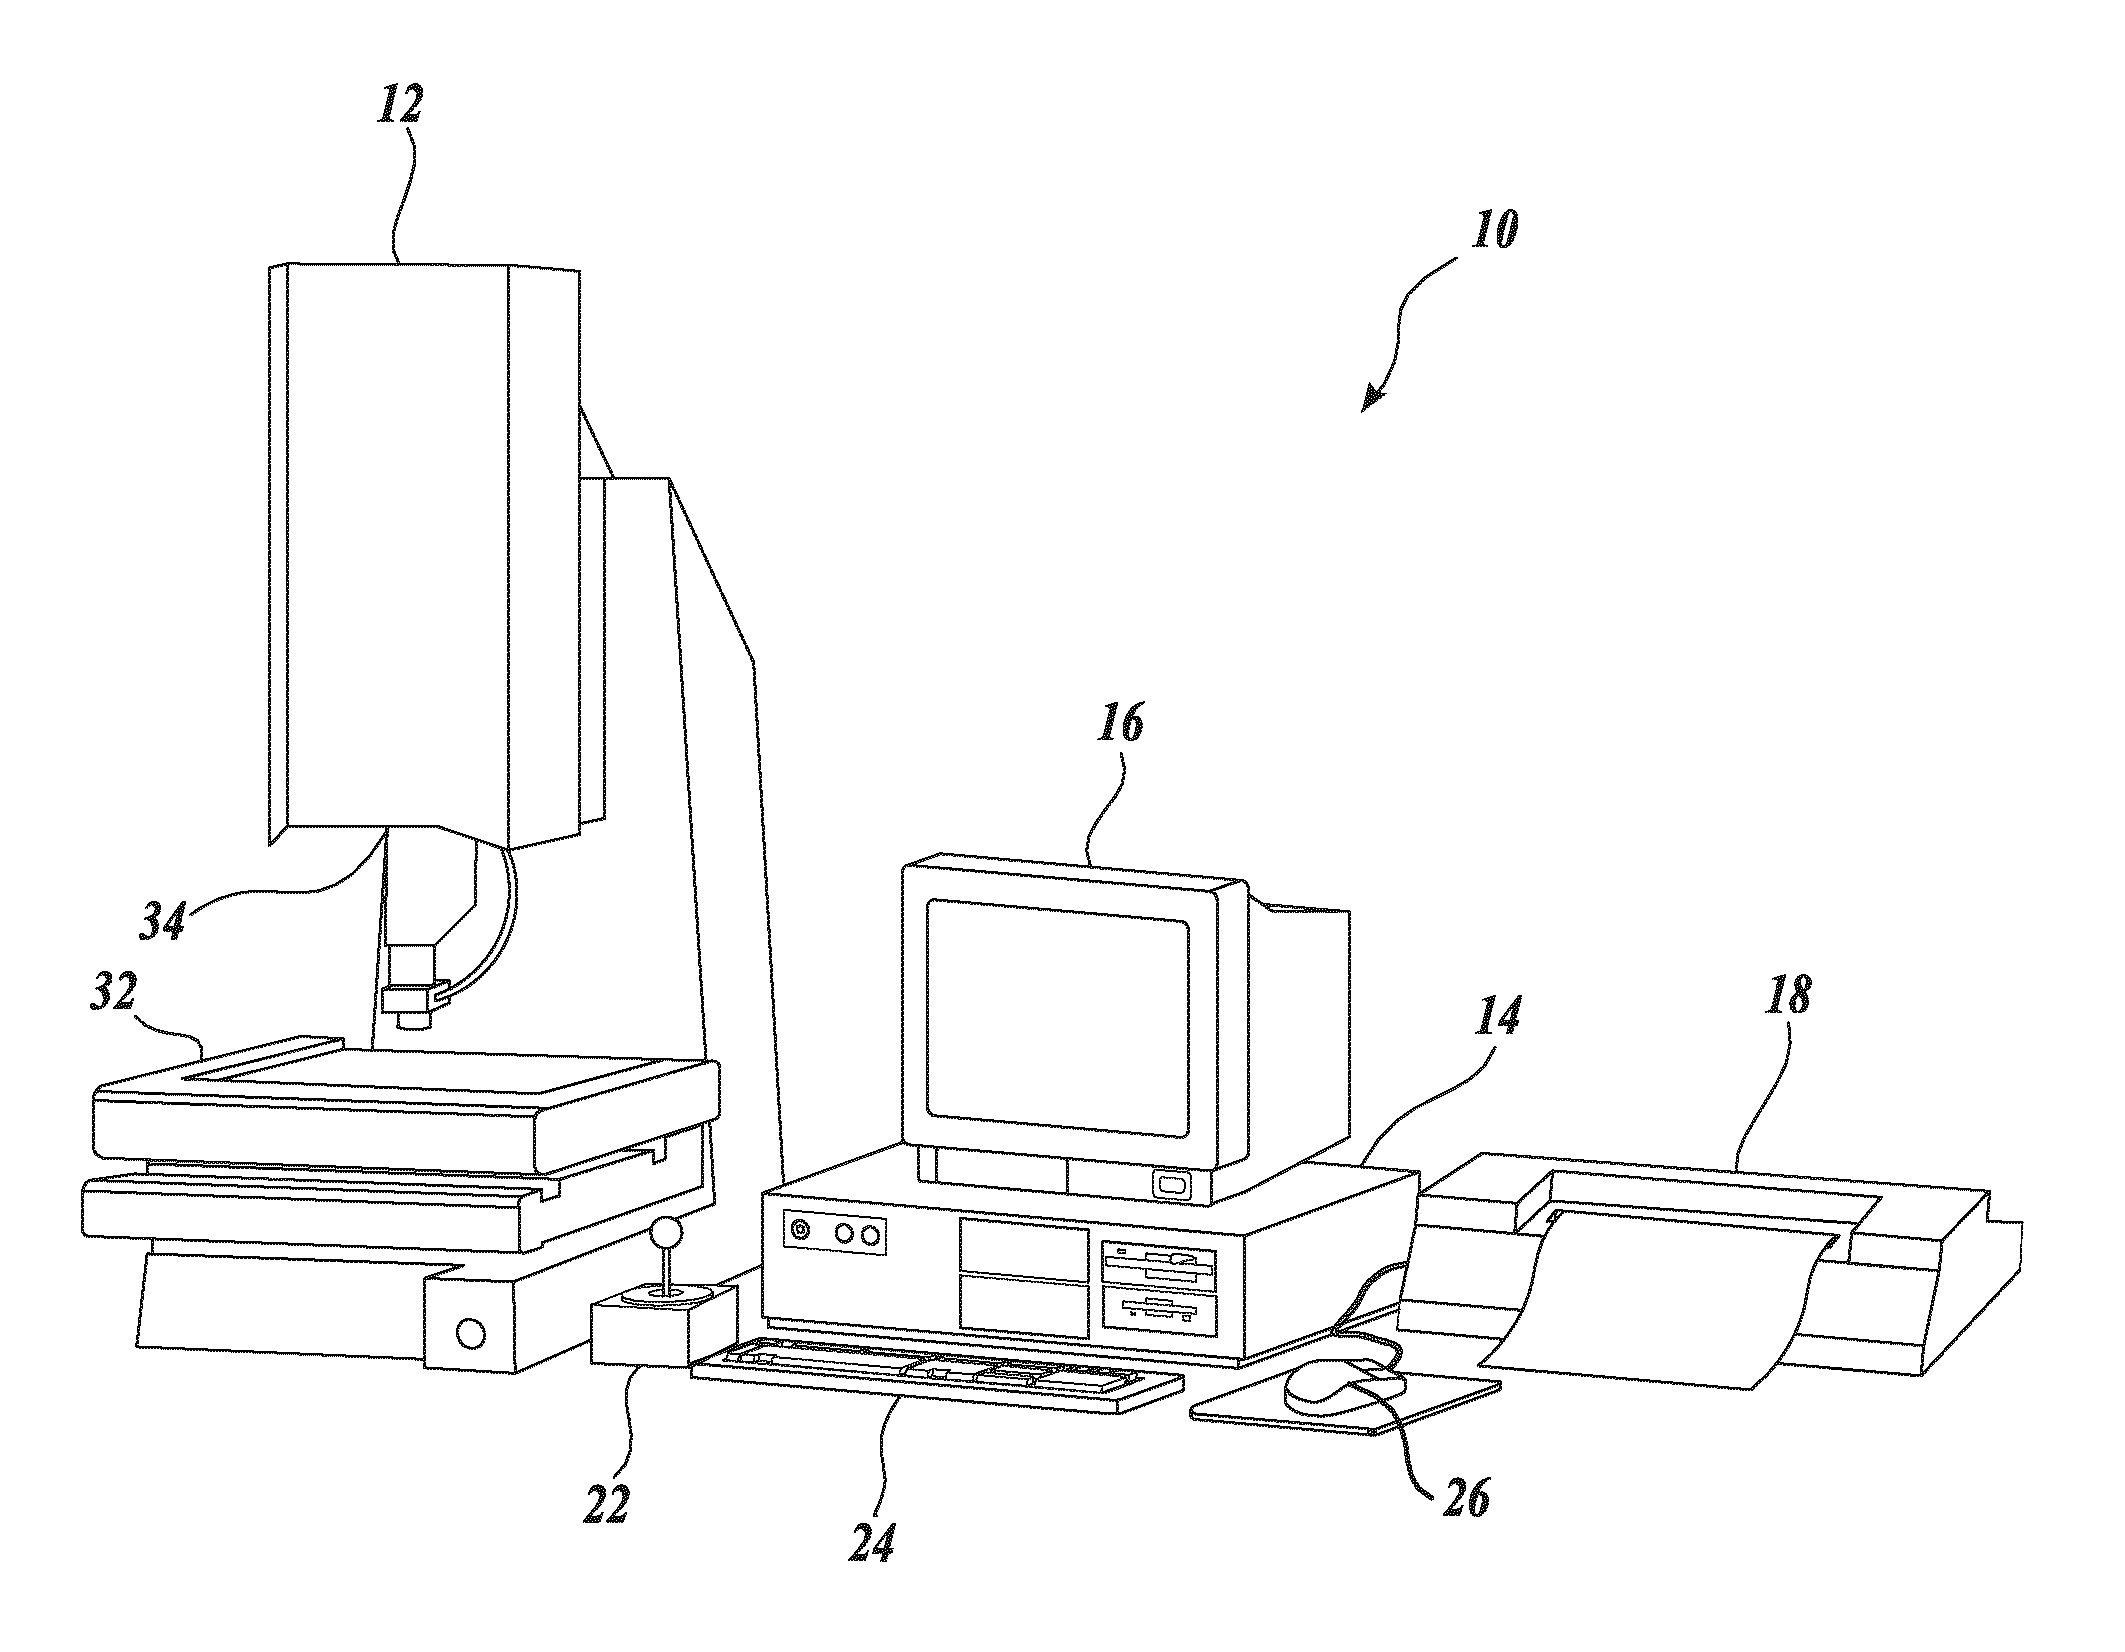 Autofocus video tool and method for precise dimensional inspection